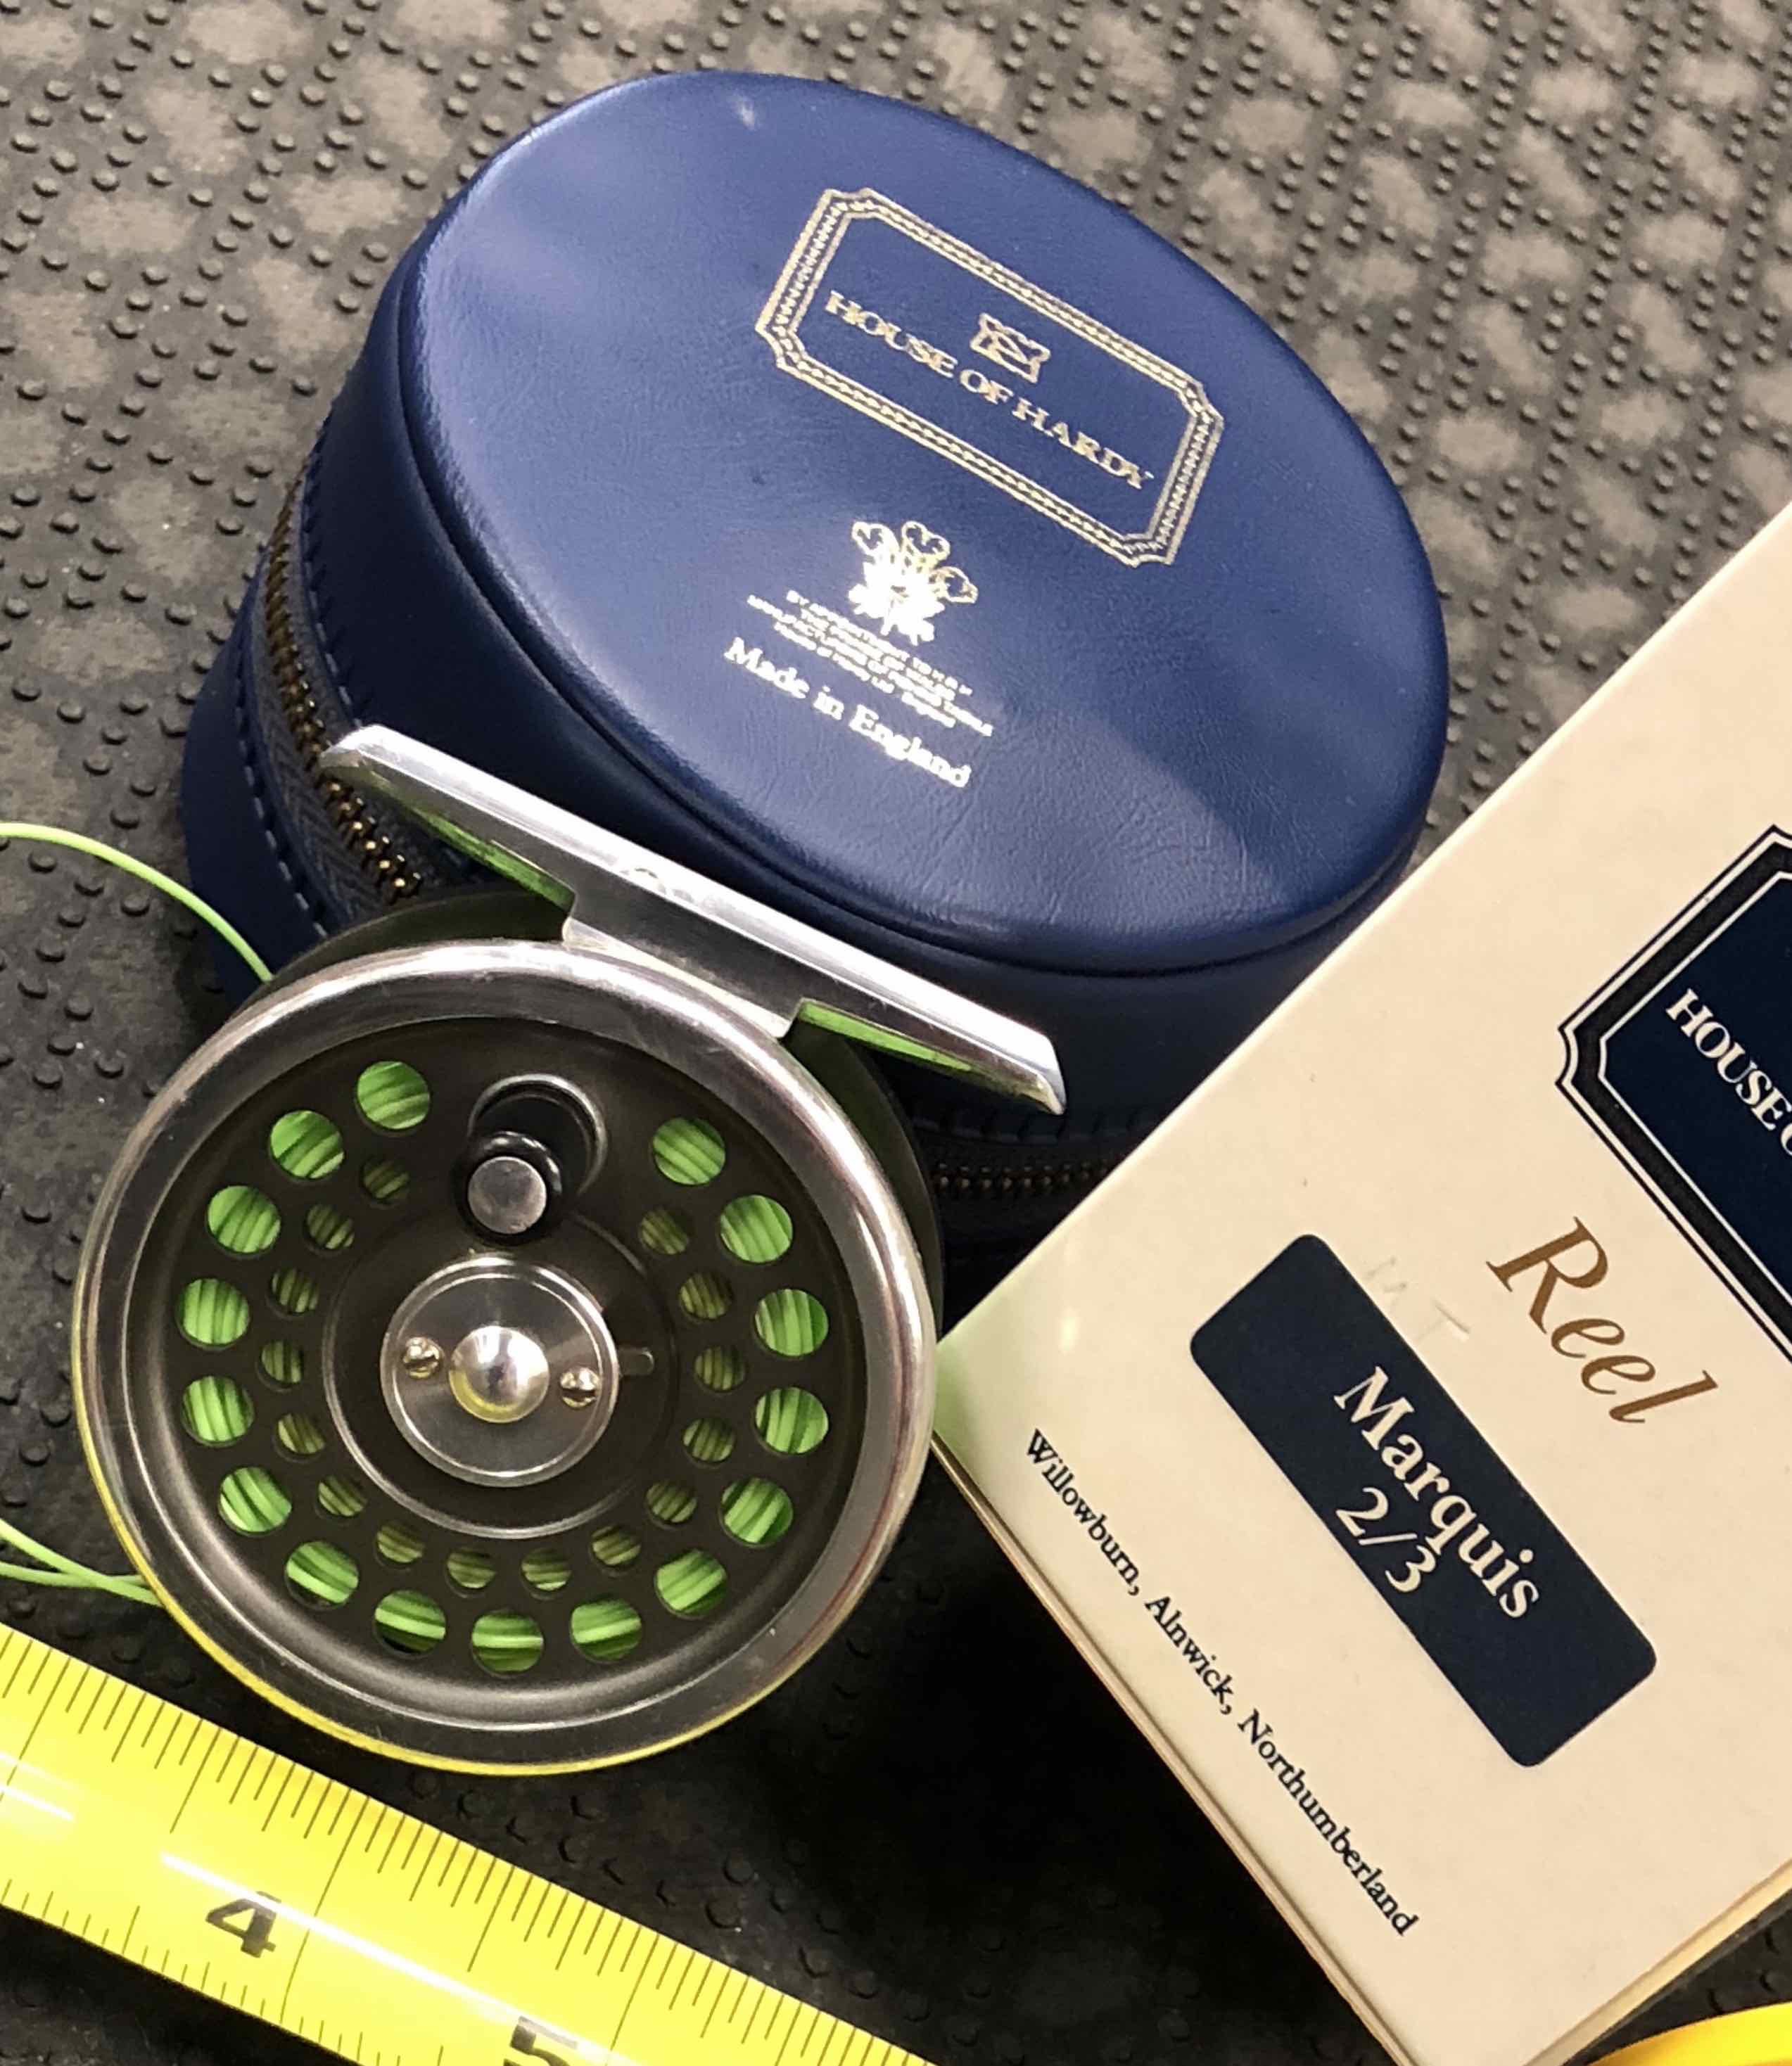 Hardy Fly Reel - Made in England - Marquis #2/3 c/w Original Box, Zippered Vinyl Case & Scientific Anglers GPX WF3F Fly Line - LIKE NEW! - $170